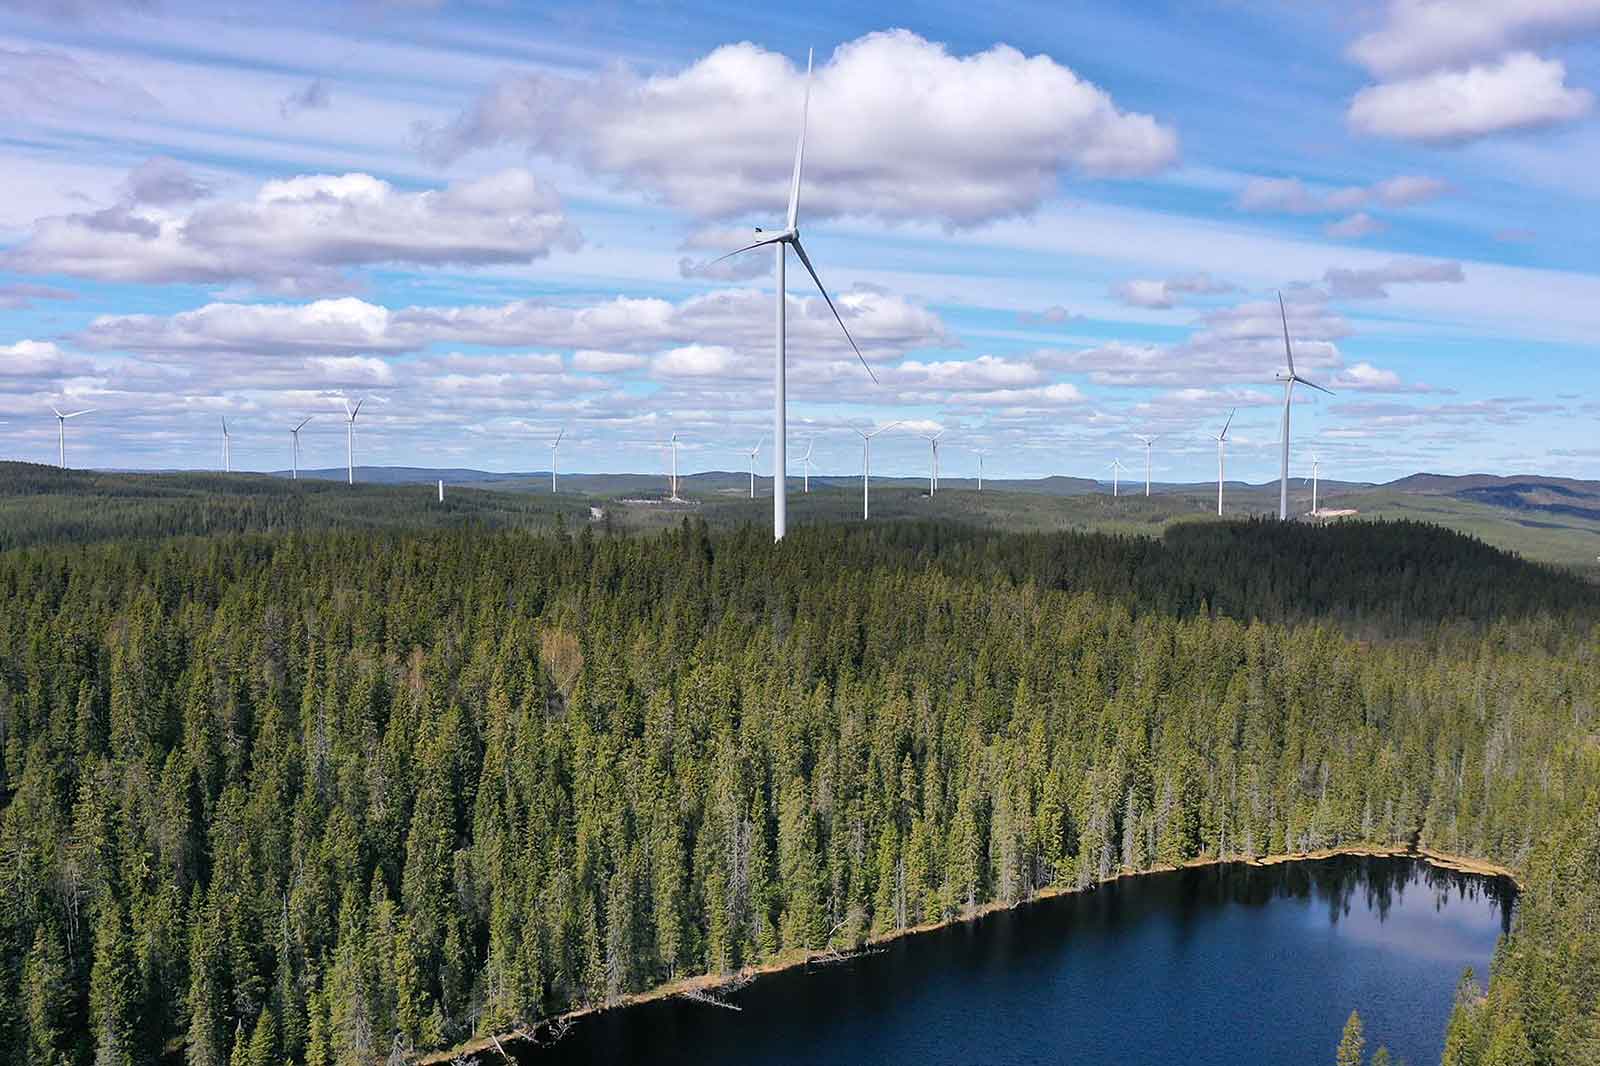 Large-scale project in Sweden: Nysäter wind farm connects to grid